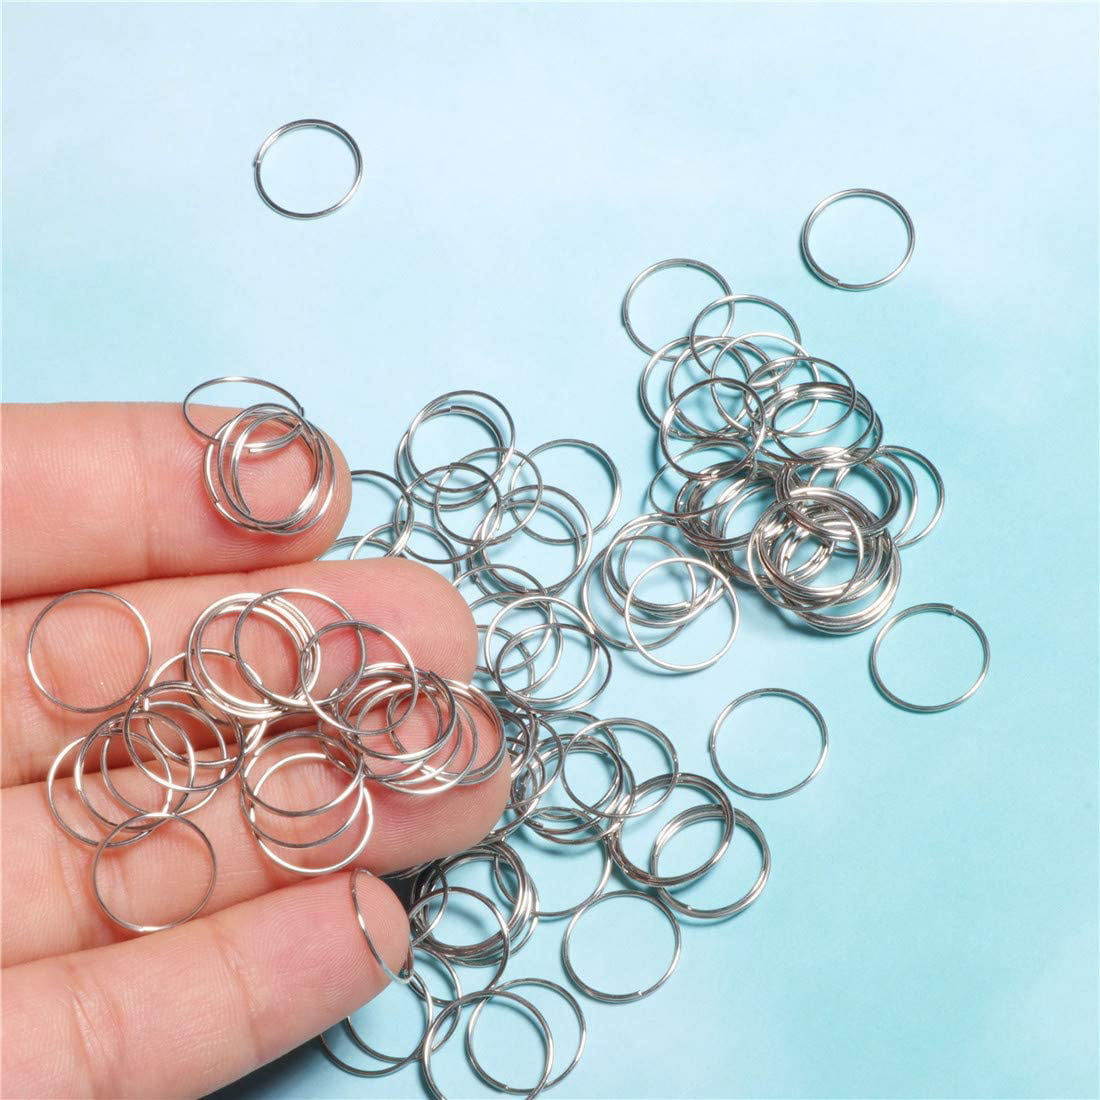 100Pcs 14mm Silver Tone Metal Connector Rings for Chandelier Lamp Repair Parts 